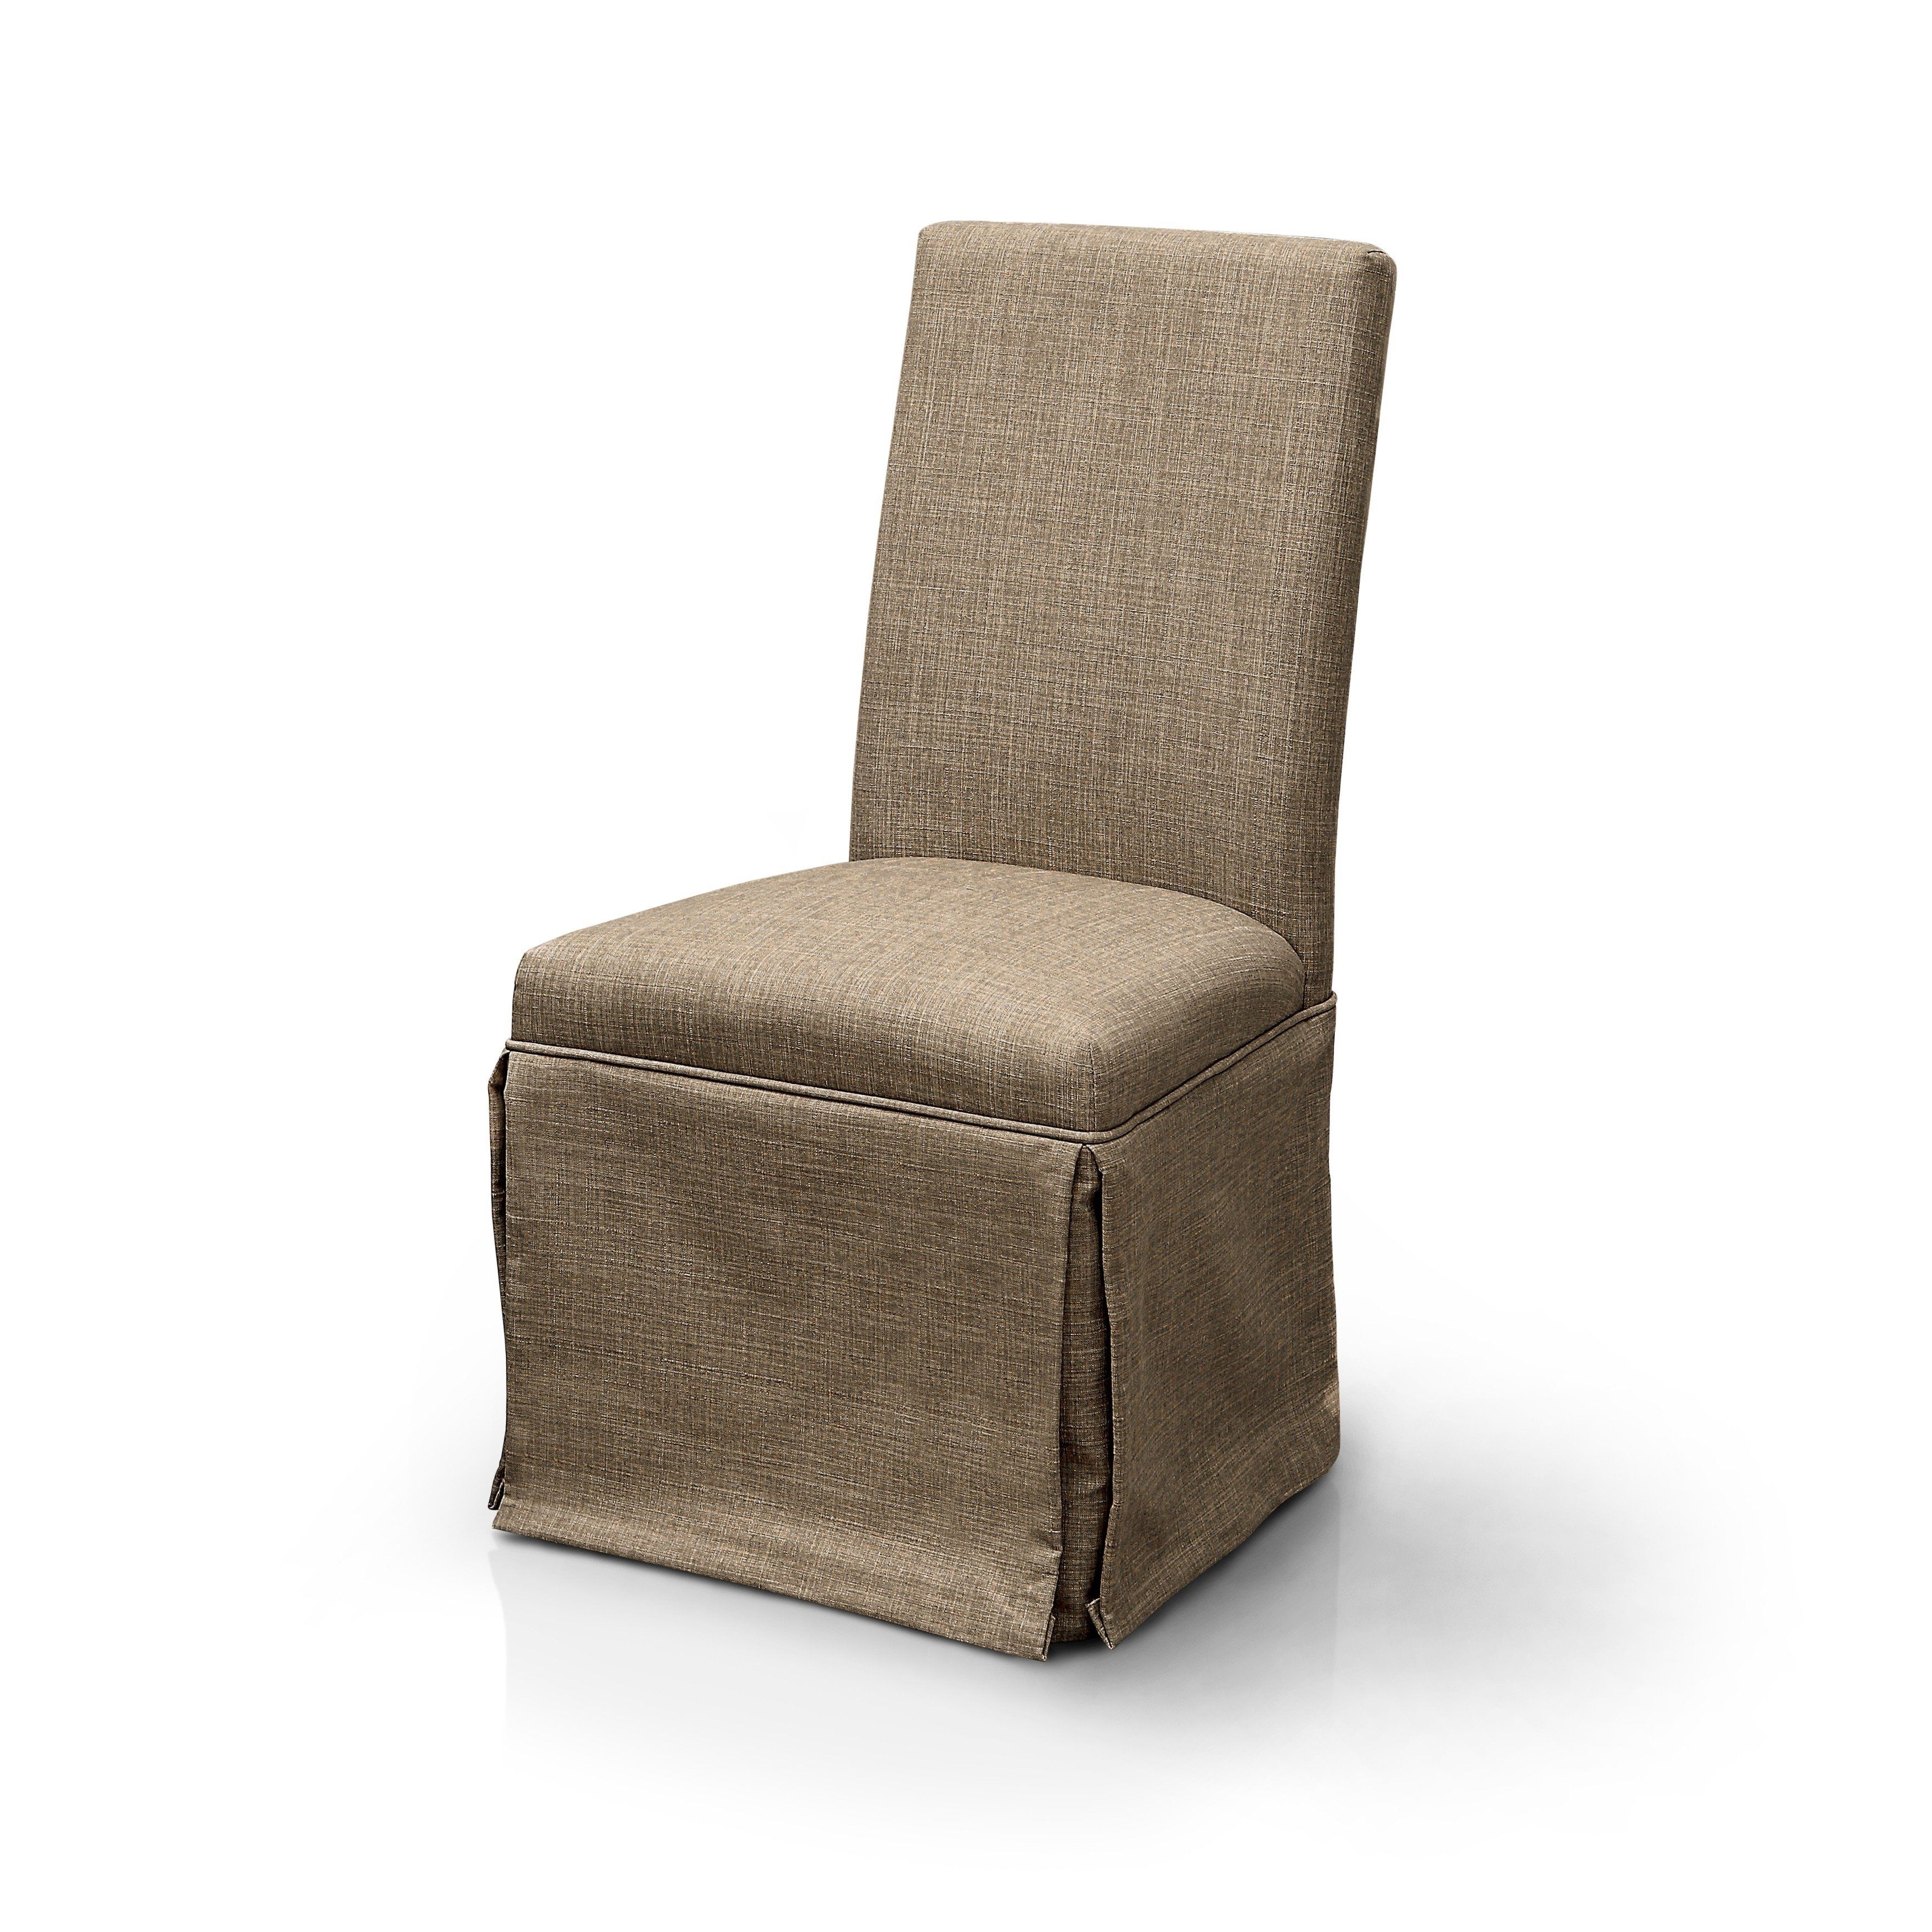 Buy Kitchen & Dining Room Chairs Online At Overstock (View 2 of 20)